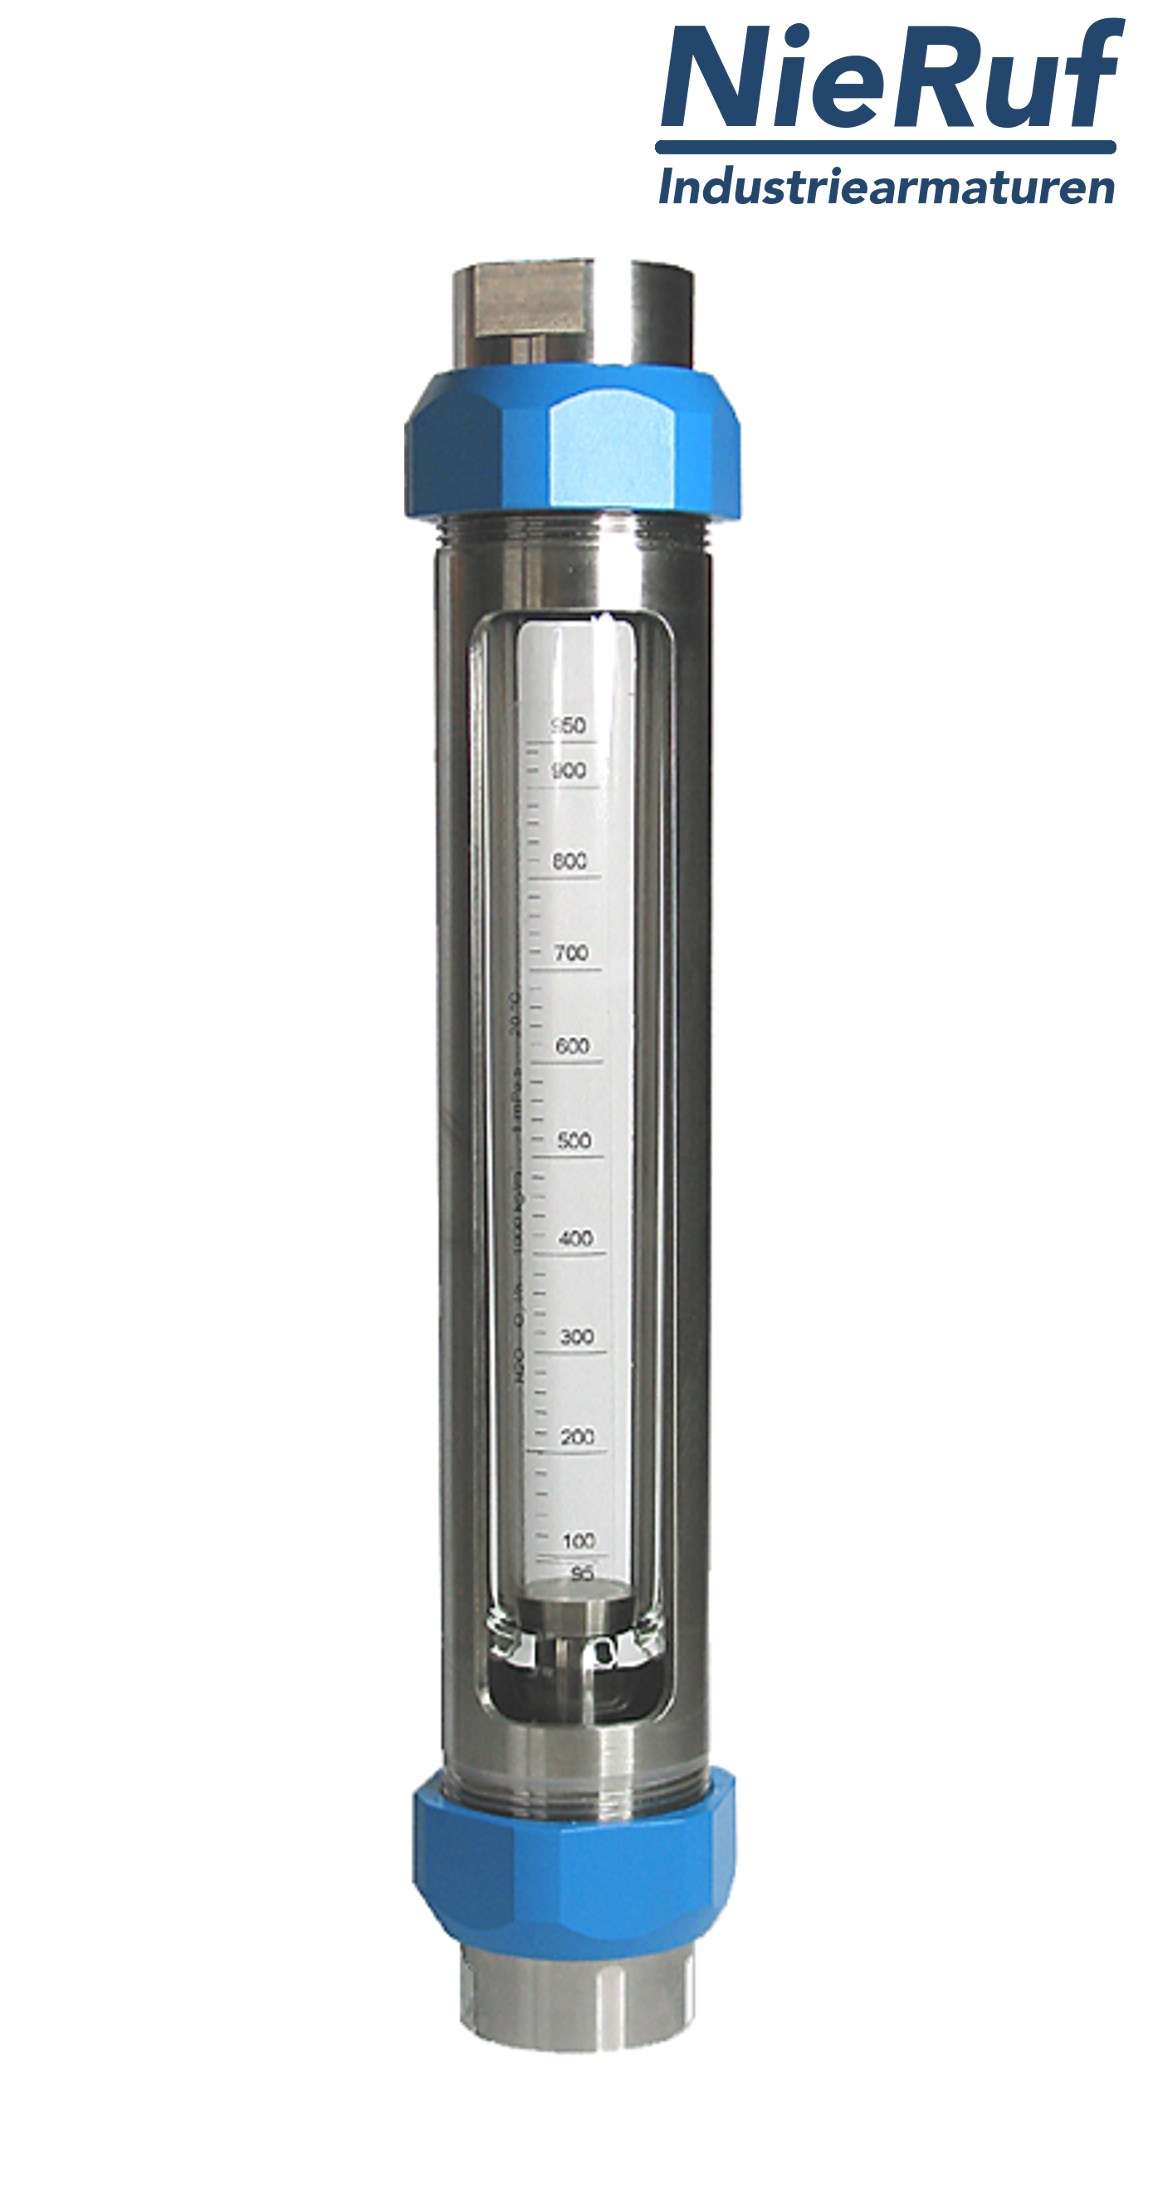 Variable area flowmeter stainless steel + borosilicate 1/2" inch 140.0 - 1400.0 l/h air EPDM